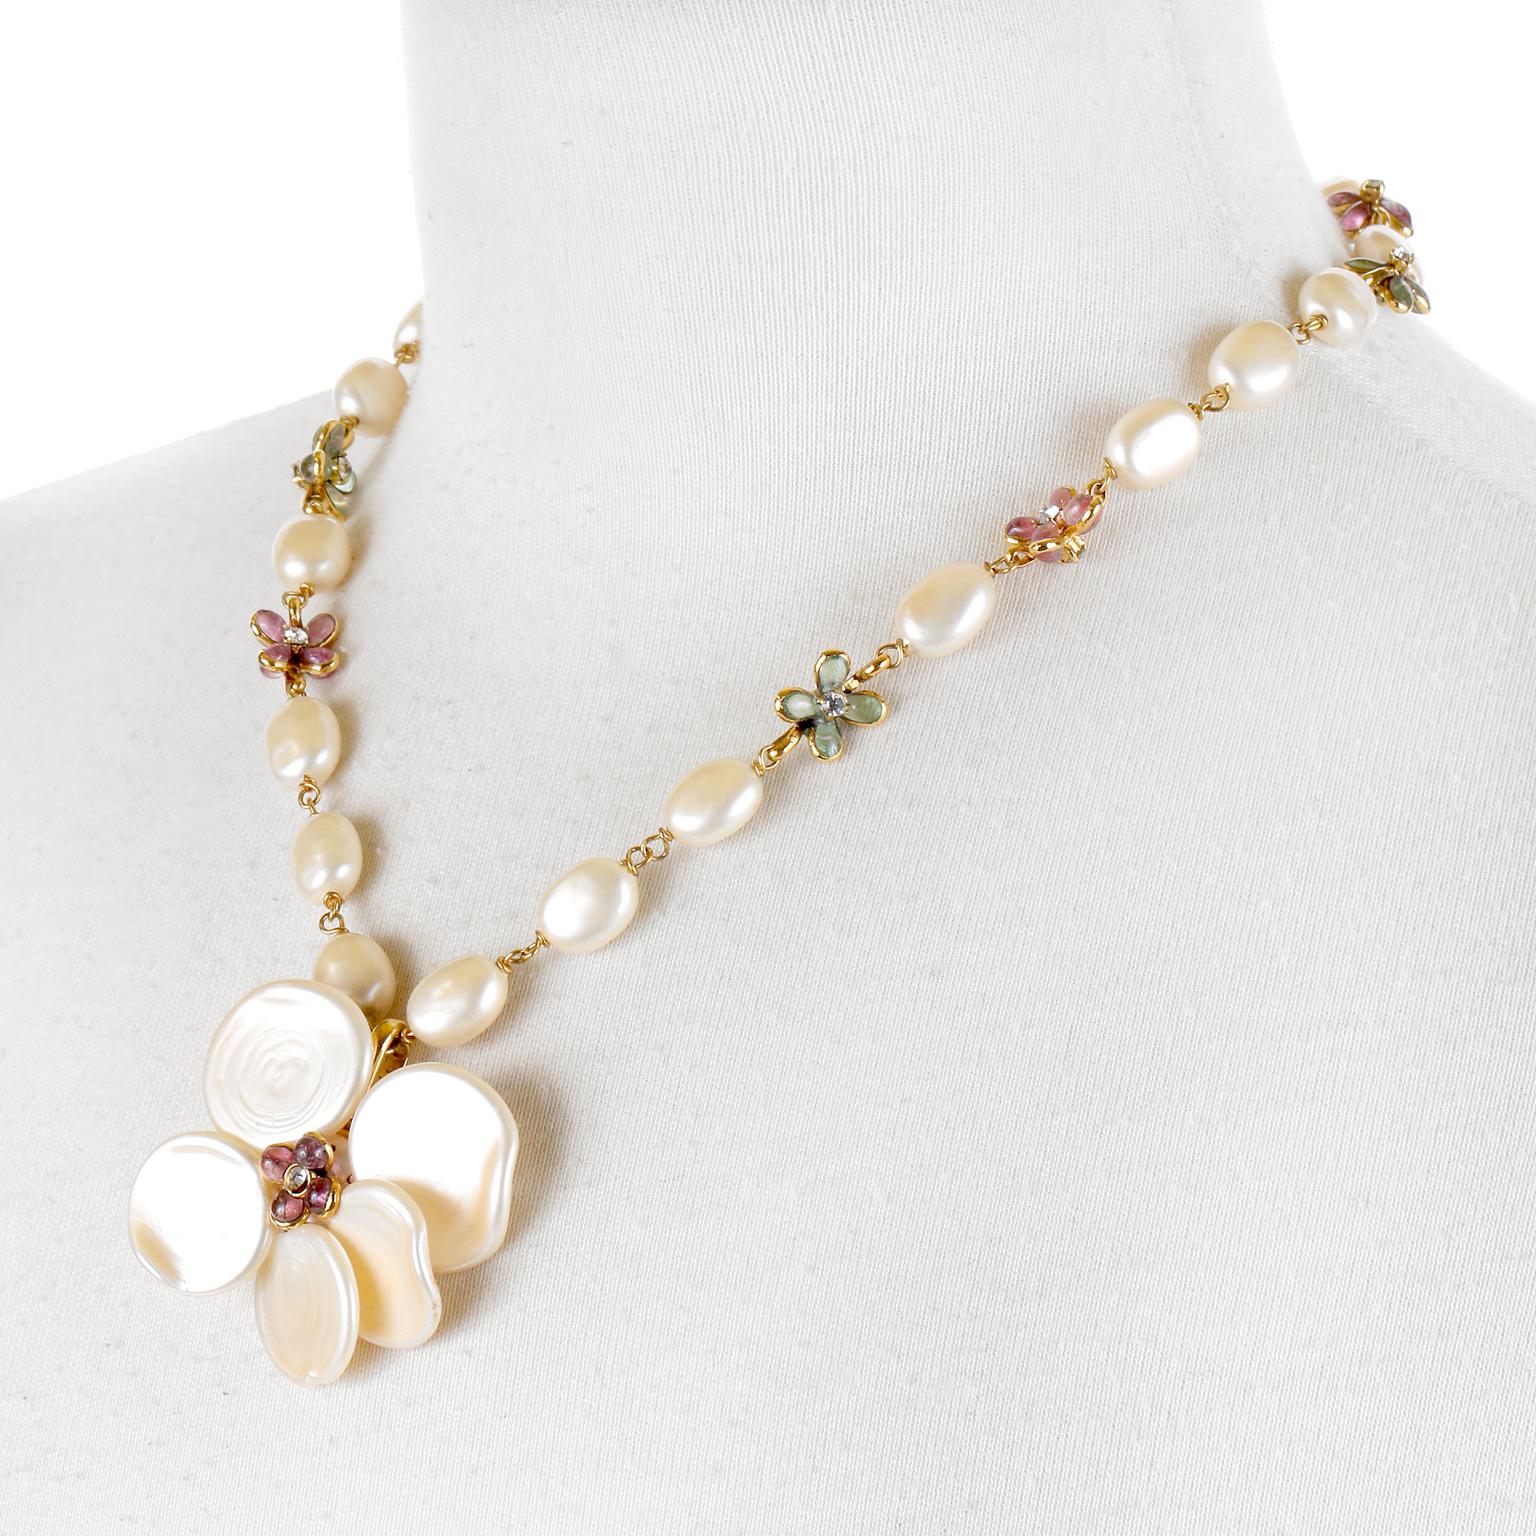 This authentic Chanel Pearl Camellia Necklace is in excellent condition from the Spring 1999 collection.  Large faux pearls are strung together with gold tone chain and are separated by dainty enamel flowers in dusky pink and green. A large mother